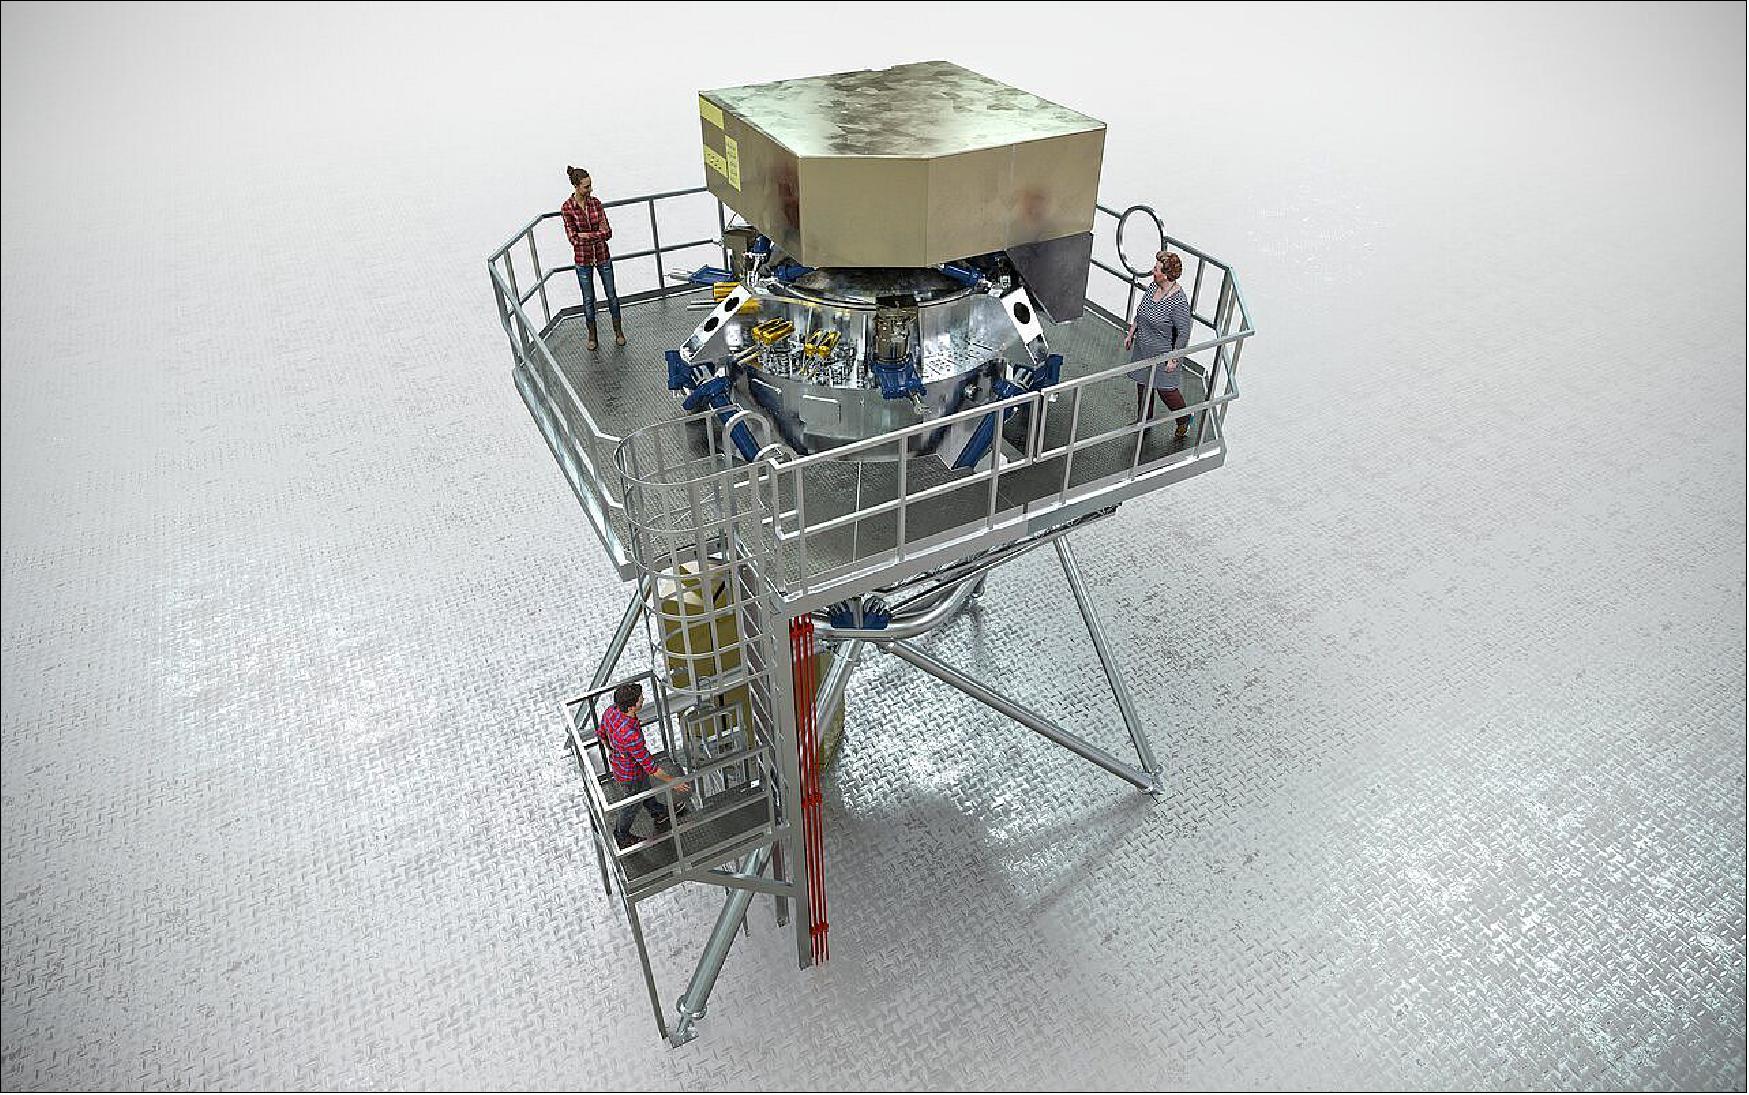 Figure 22: Artistic rendering of the METIS instrument set to be used with the Extremely Large Telescope upon completion. METIS will make full use of the giant main mirror of the telescope to study a wide range of science topics, from objects in our Solar System to distant active galaxies (image credit: ESO/METIS Consortium/L. Calçada)